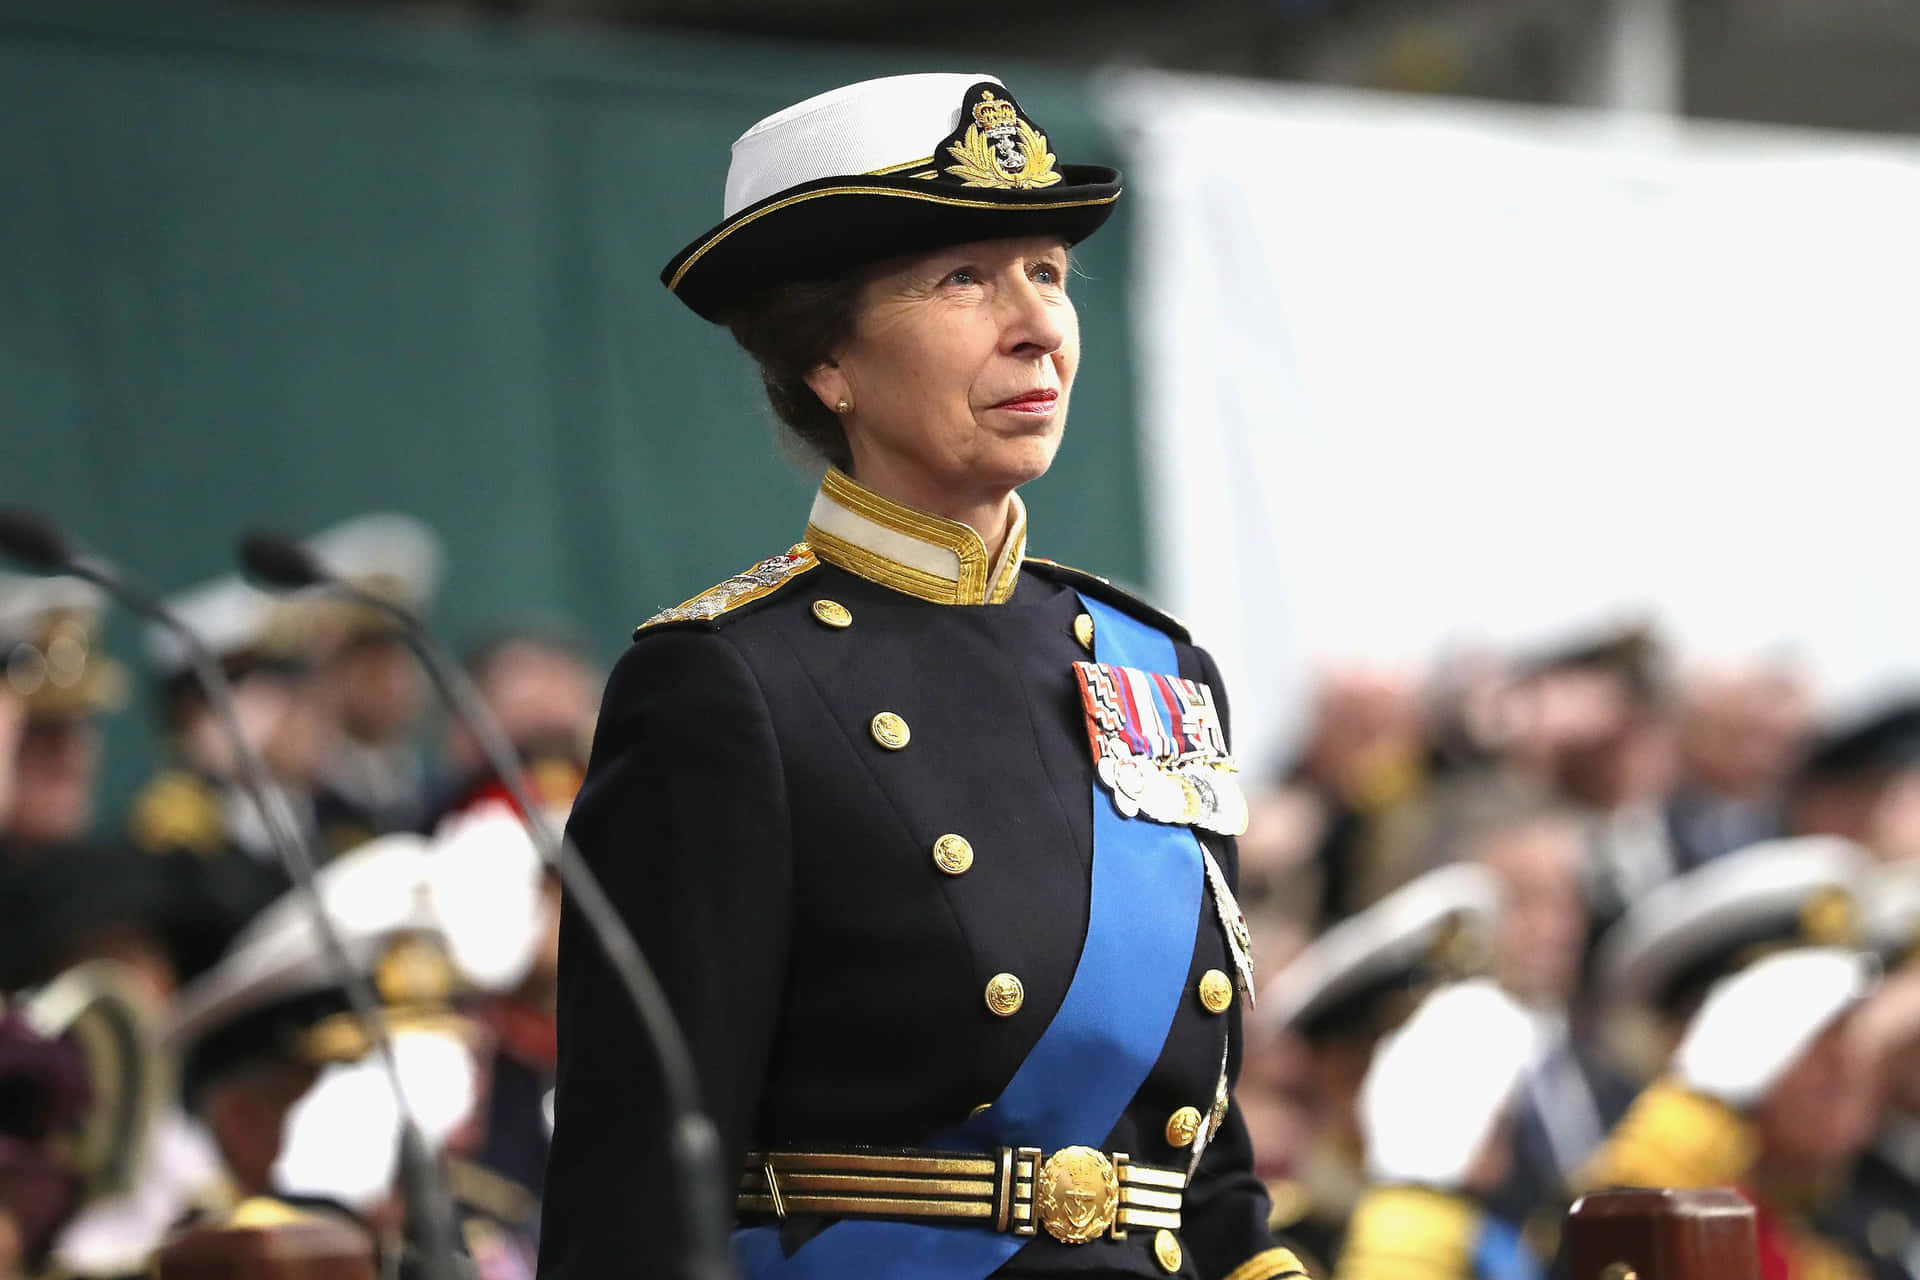 Princess Anne In Royal Military Suit Wallpaper